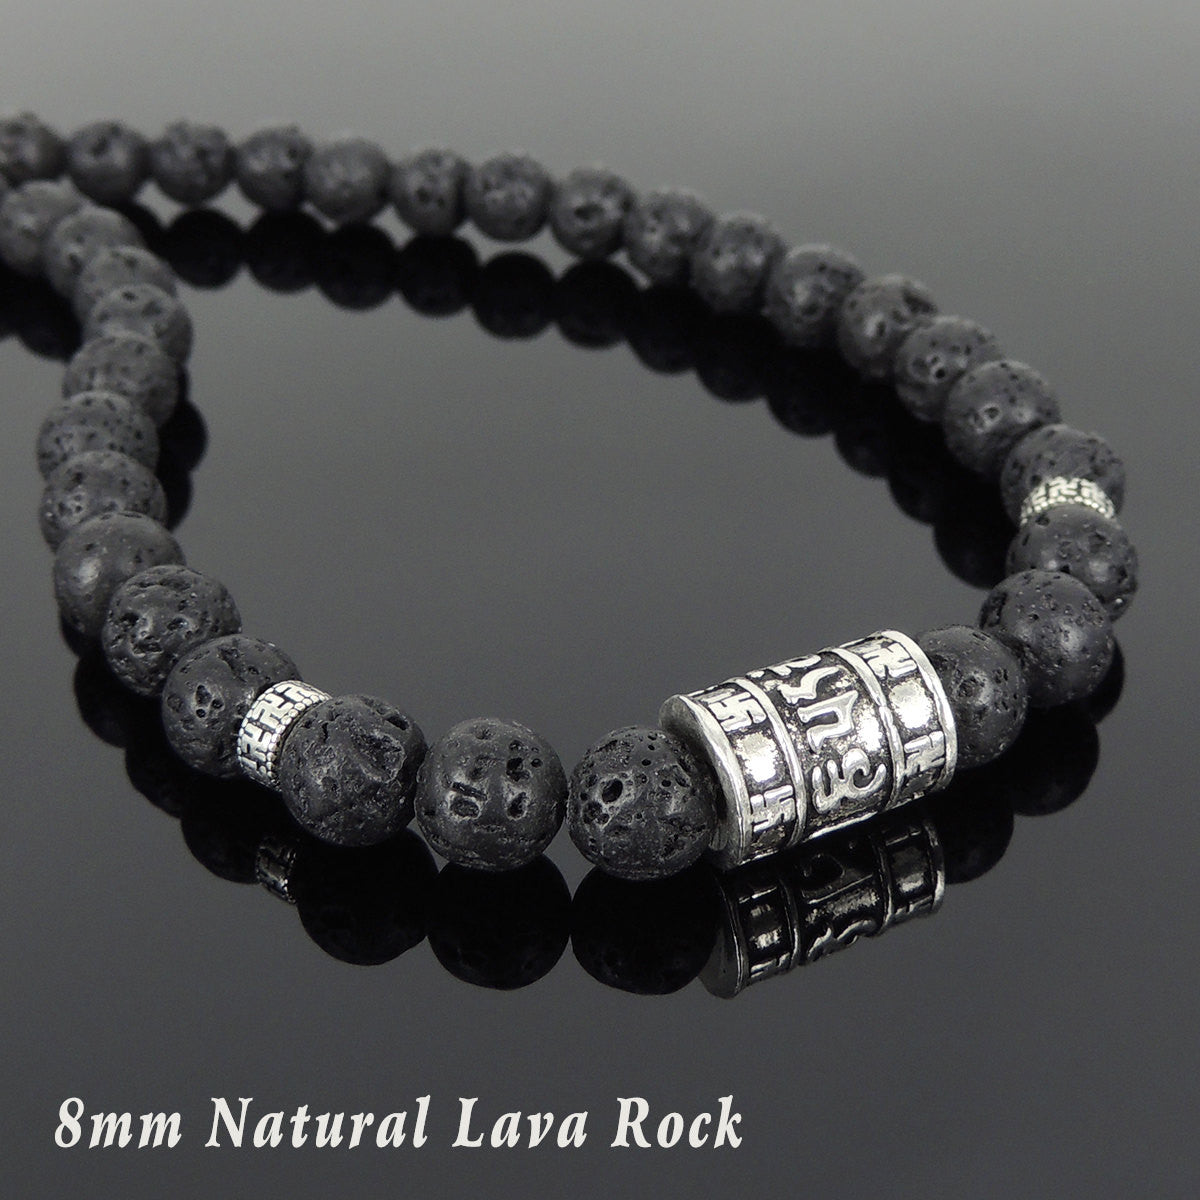 8mm Lava Rock Healing Stone Necklace with S925 Sterling Silver OM Meditation Buddhism Beads & S-hook Clasp - Handmade by Gem & Silver NK100